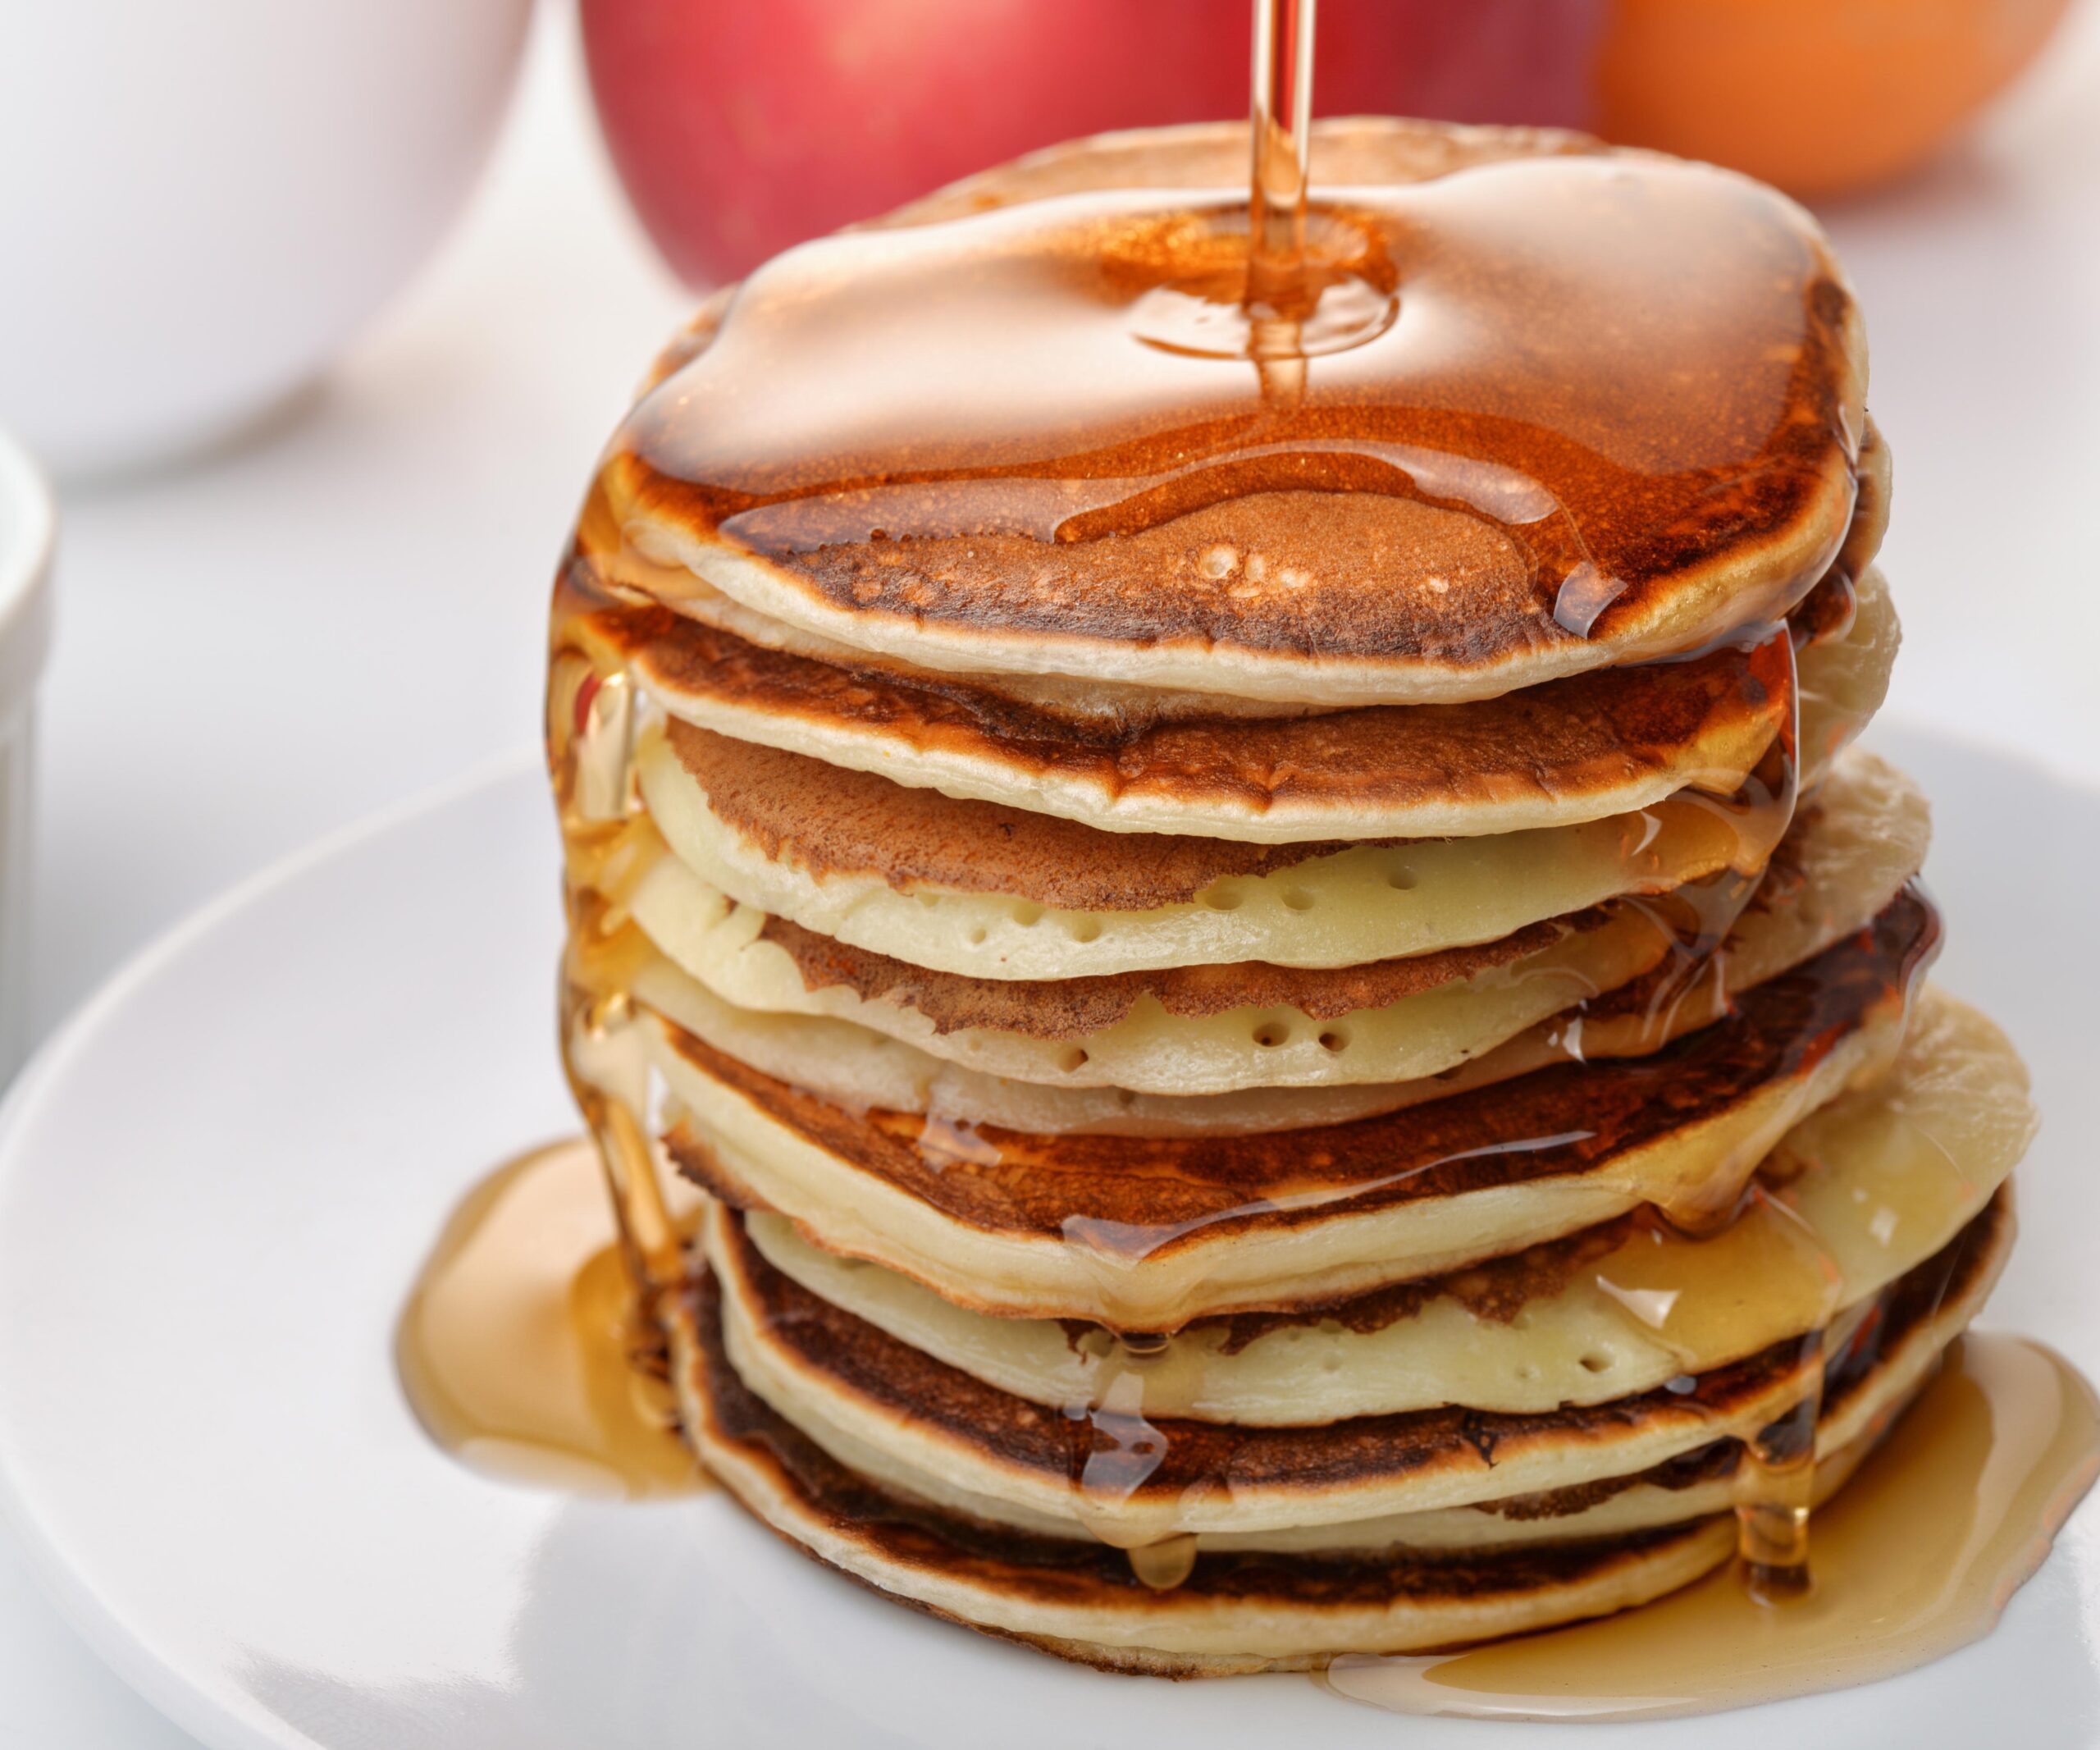 Maple Syrup: Healthy or Unhealthy?